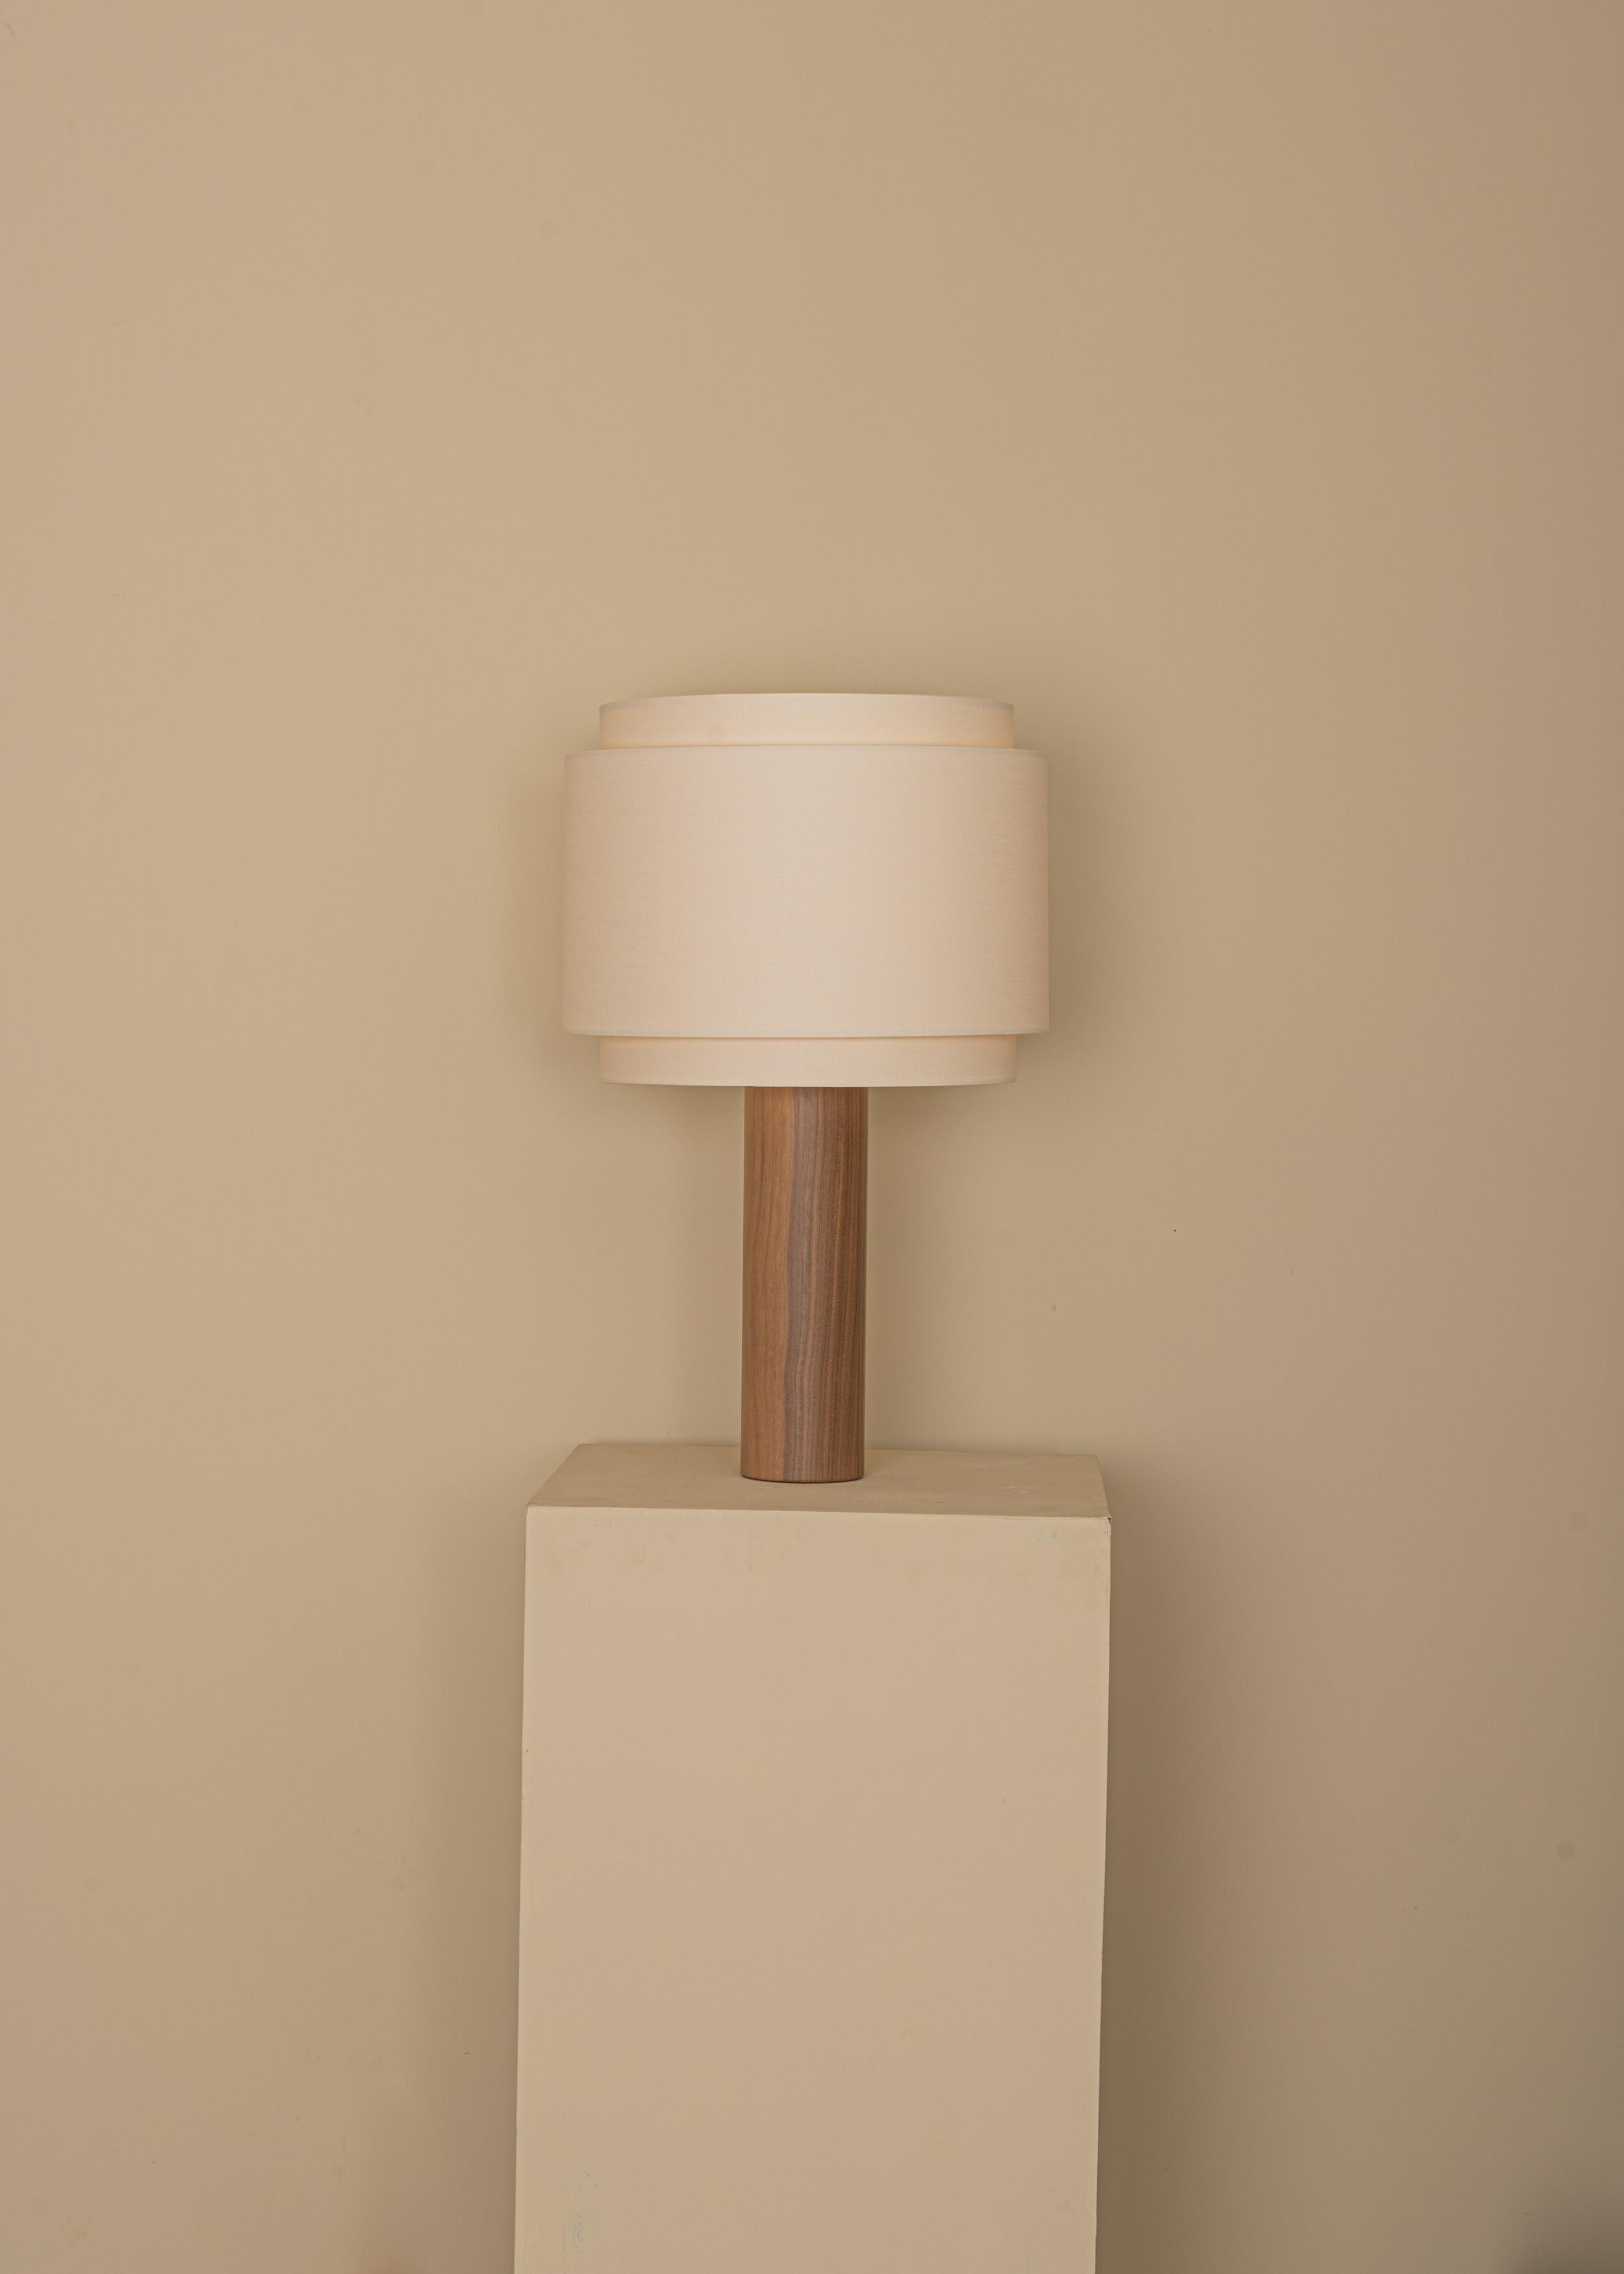 Walnut Pipo Duoble Table Lamp by Simone & Marcel
Dimensions: D 35 x W 35 x H 60 cm.
Materials: Cotton and walnut.

Also available in different marble and wood options and finishes. Custom options available on request. Please contact us. 

All our